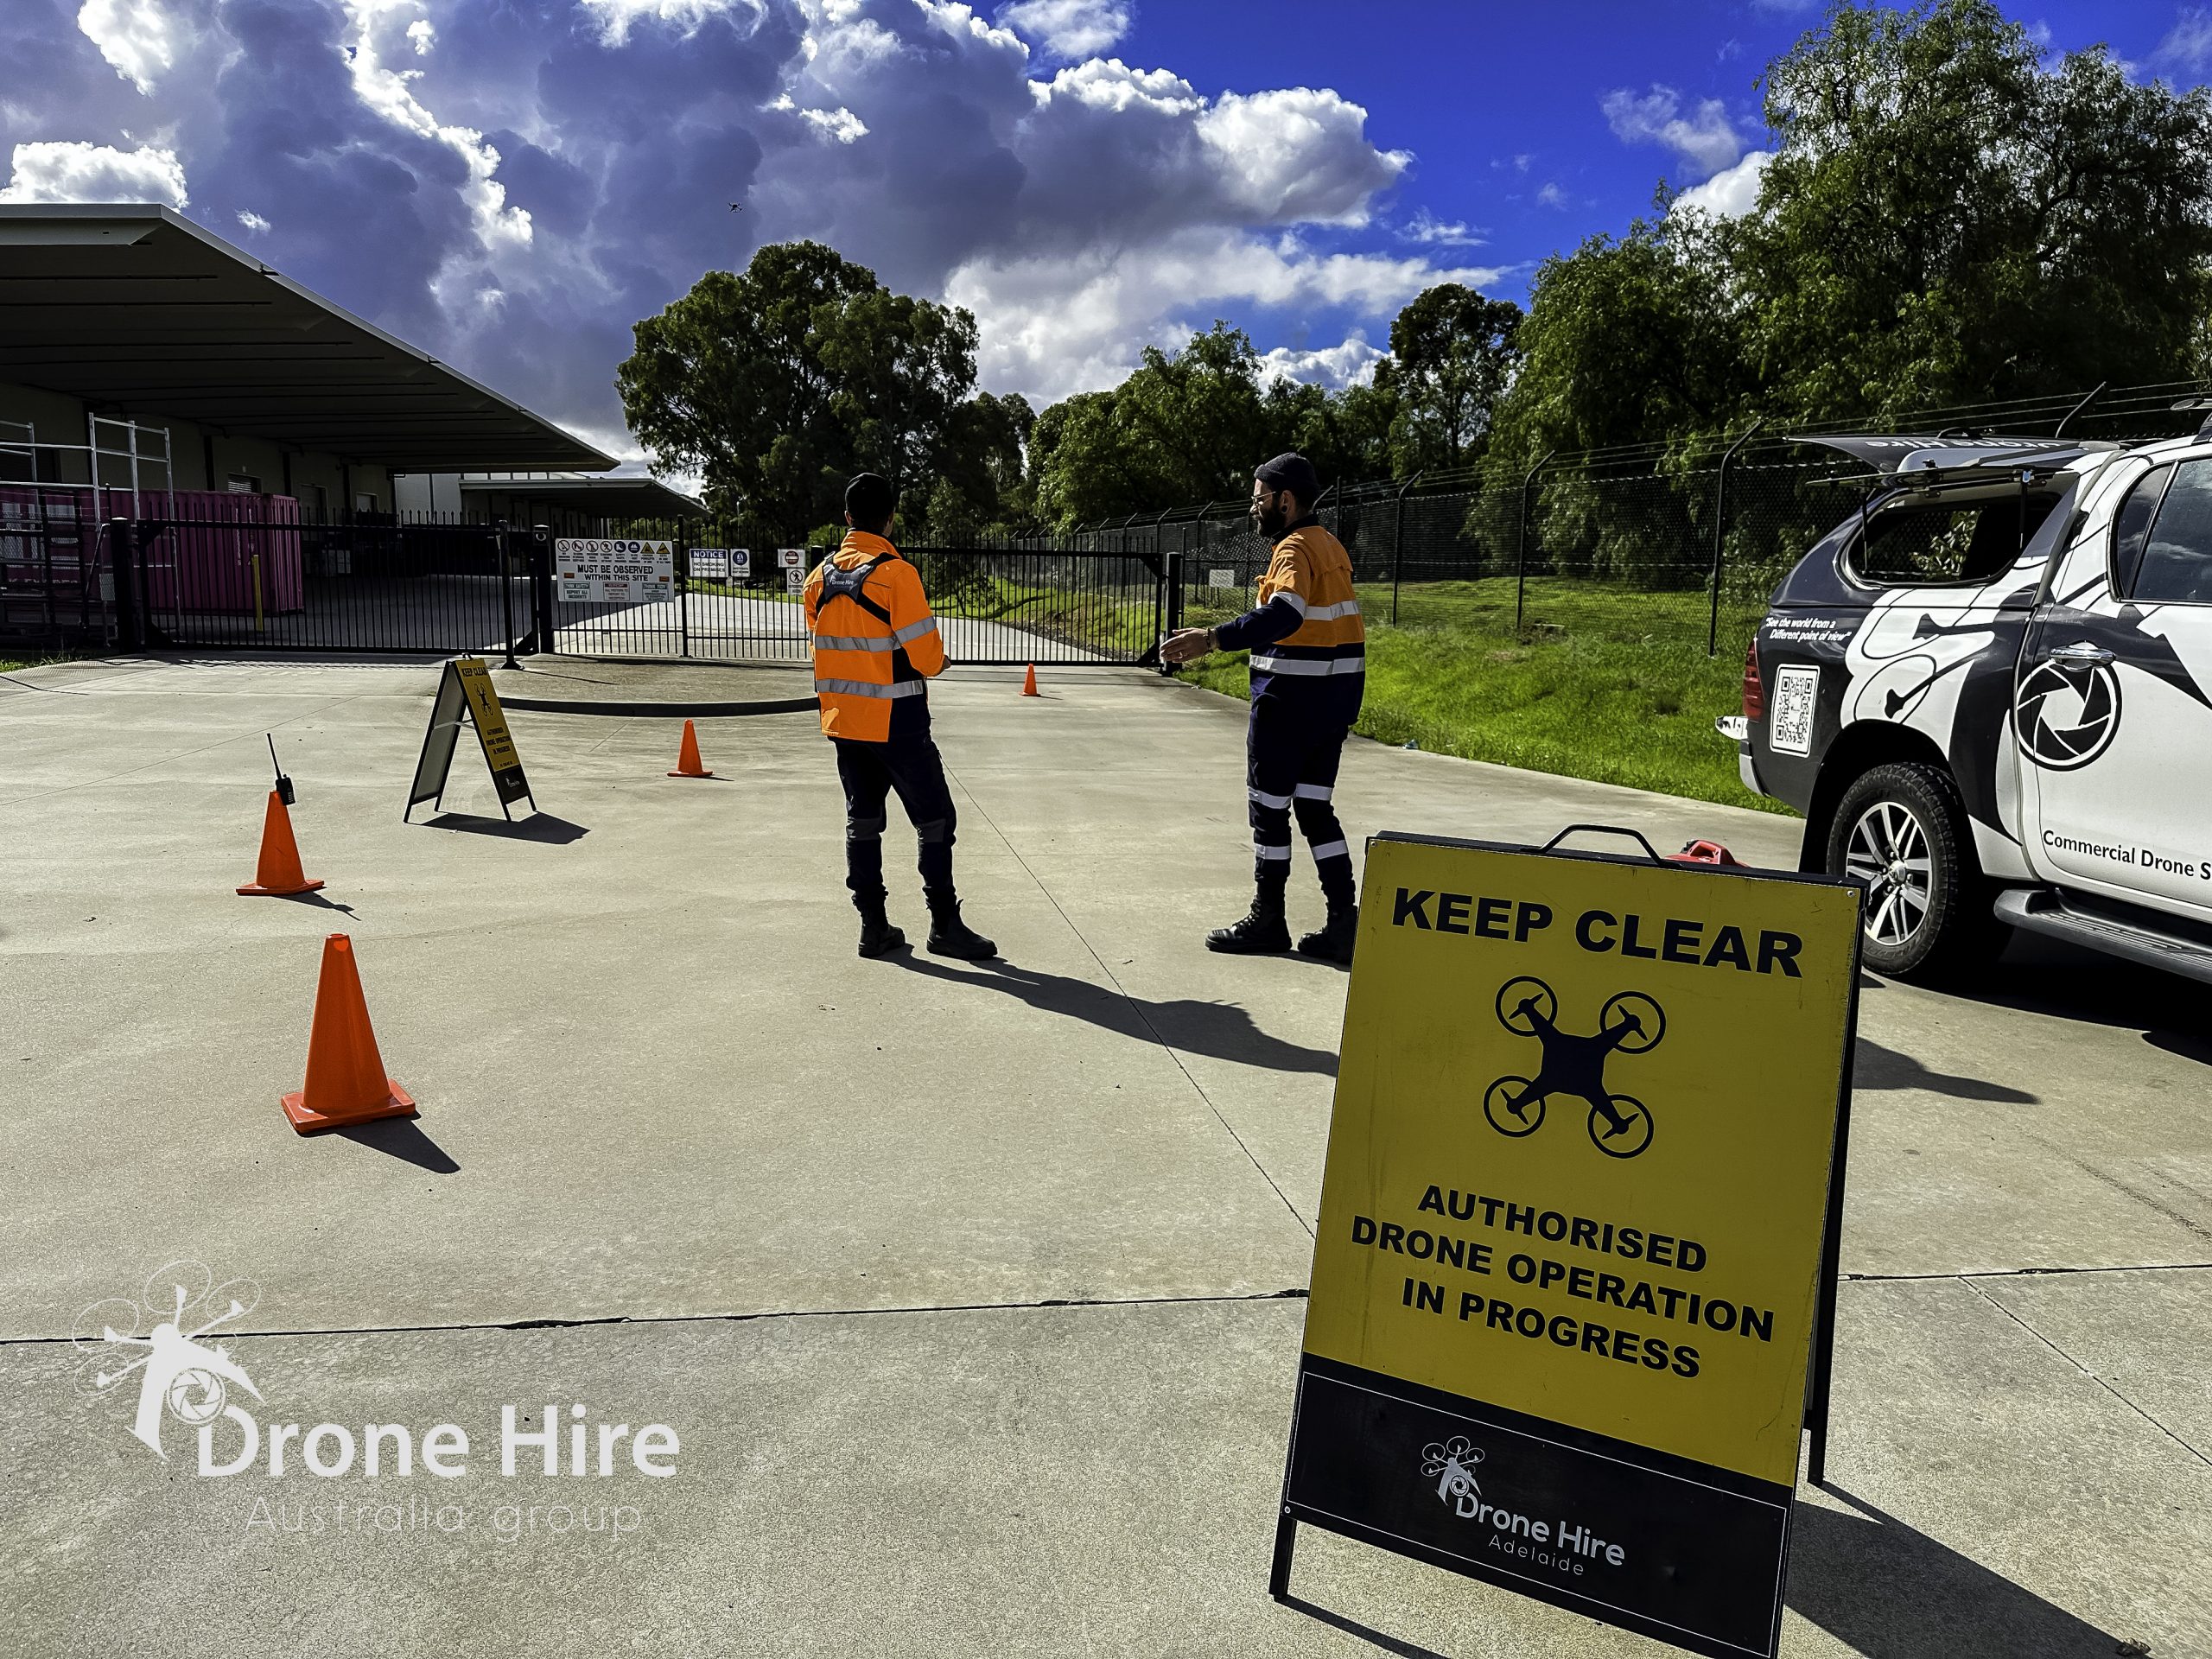 Drone Hire Australia Surveying Mapping services